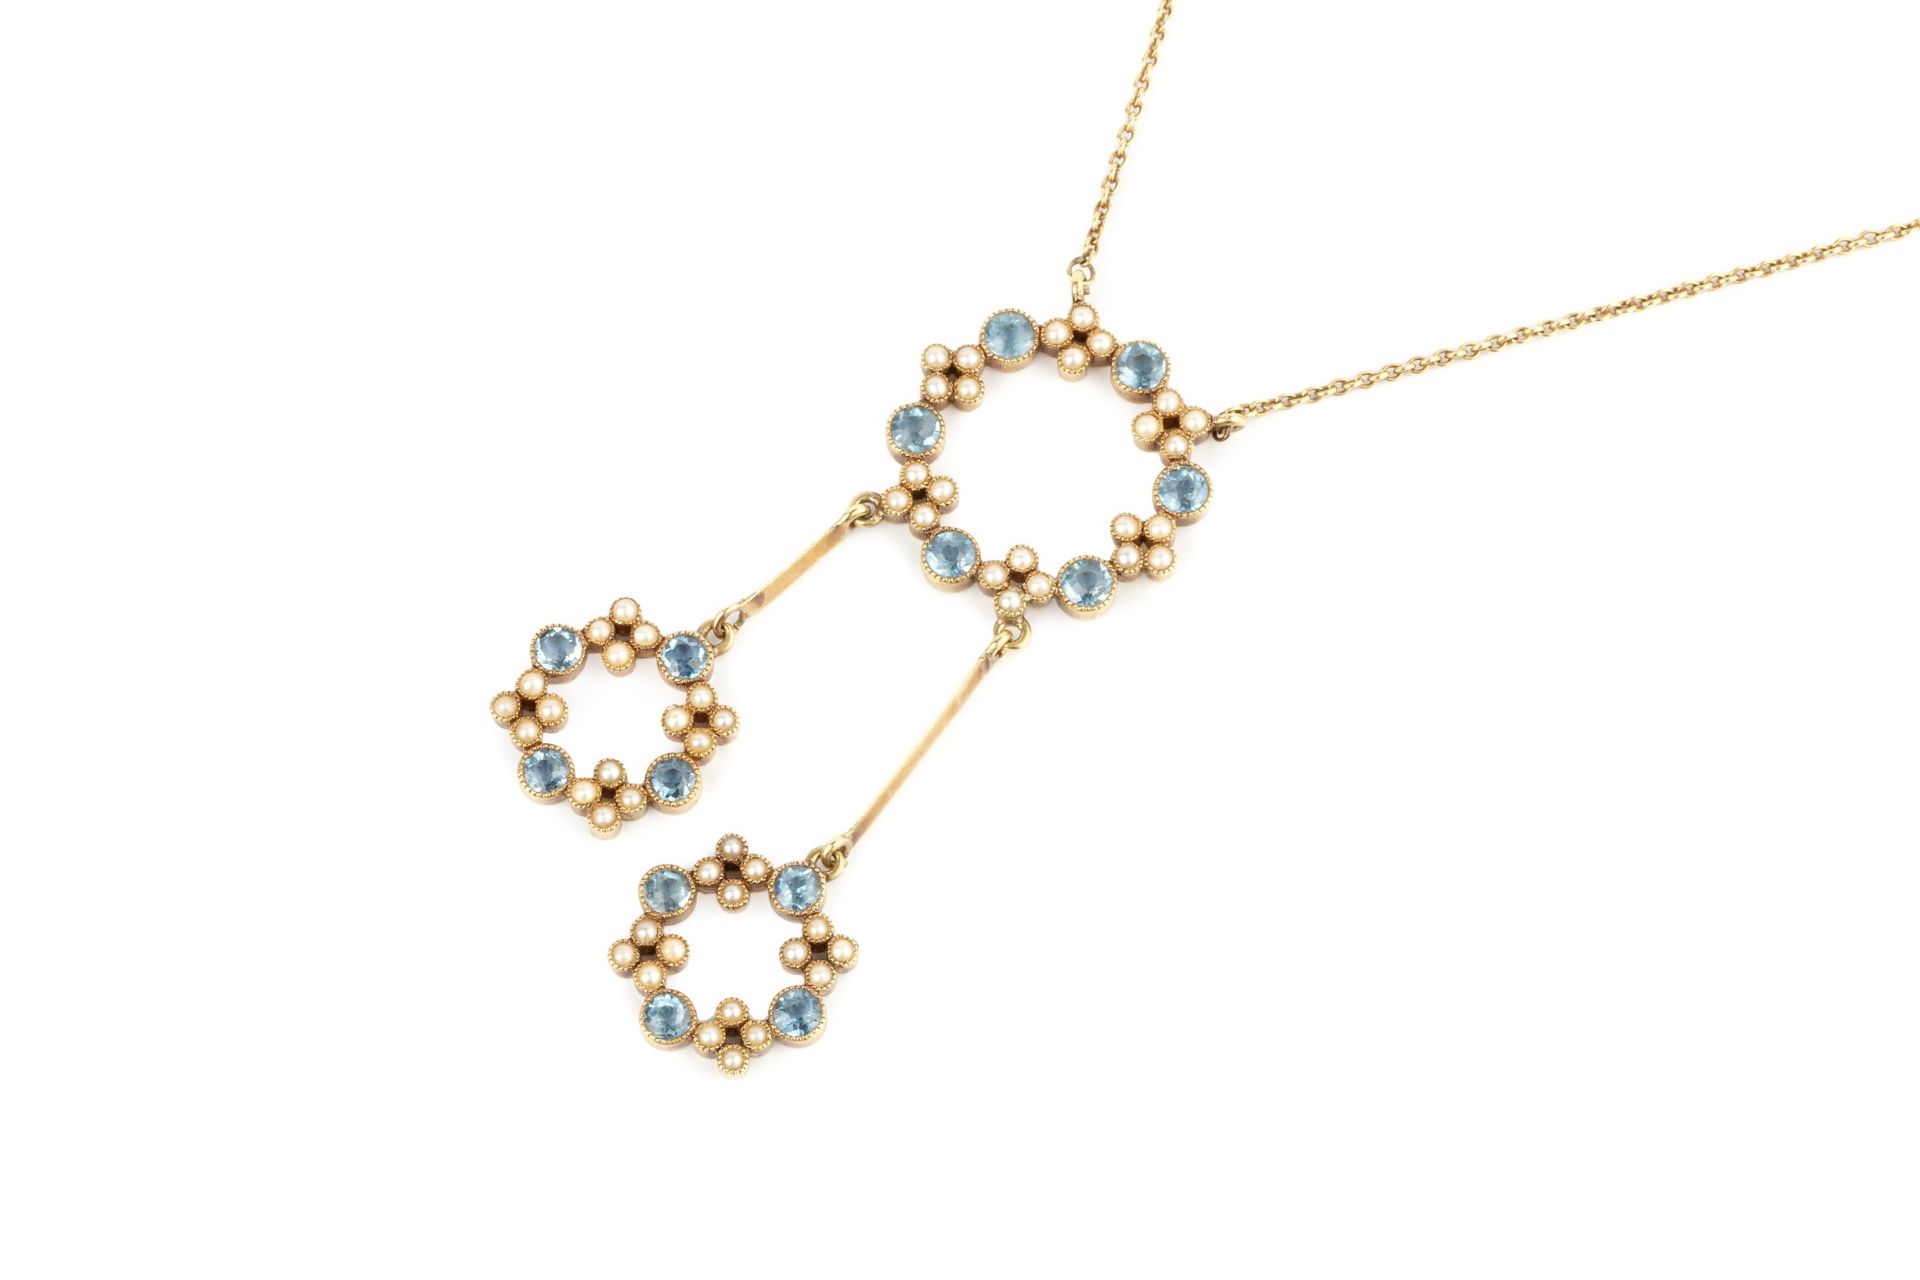 An Edwardian aquamarine and seed pearl necklace, the pendant of open circle design suspending two